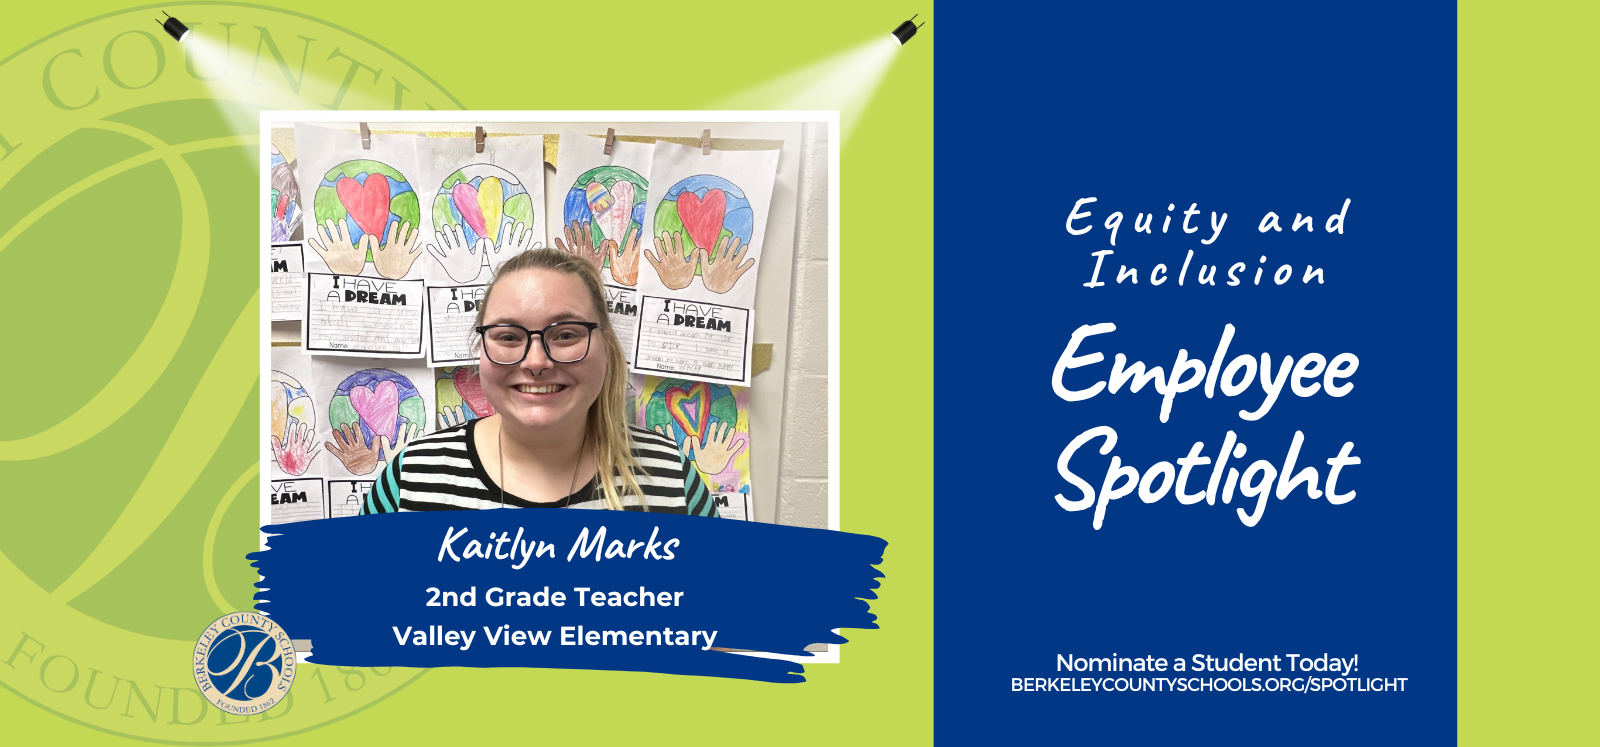 image of equity and inclusion spotlight featuring kaitlyn marks, a 2nd grade teacher at valley view elementary